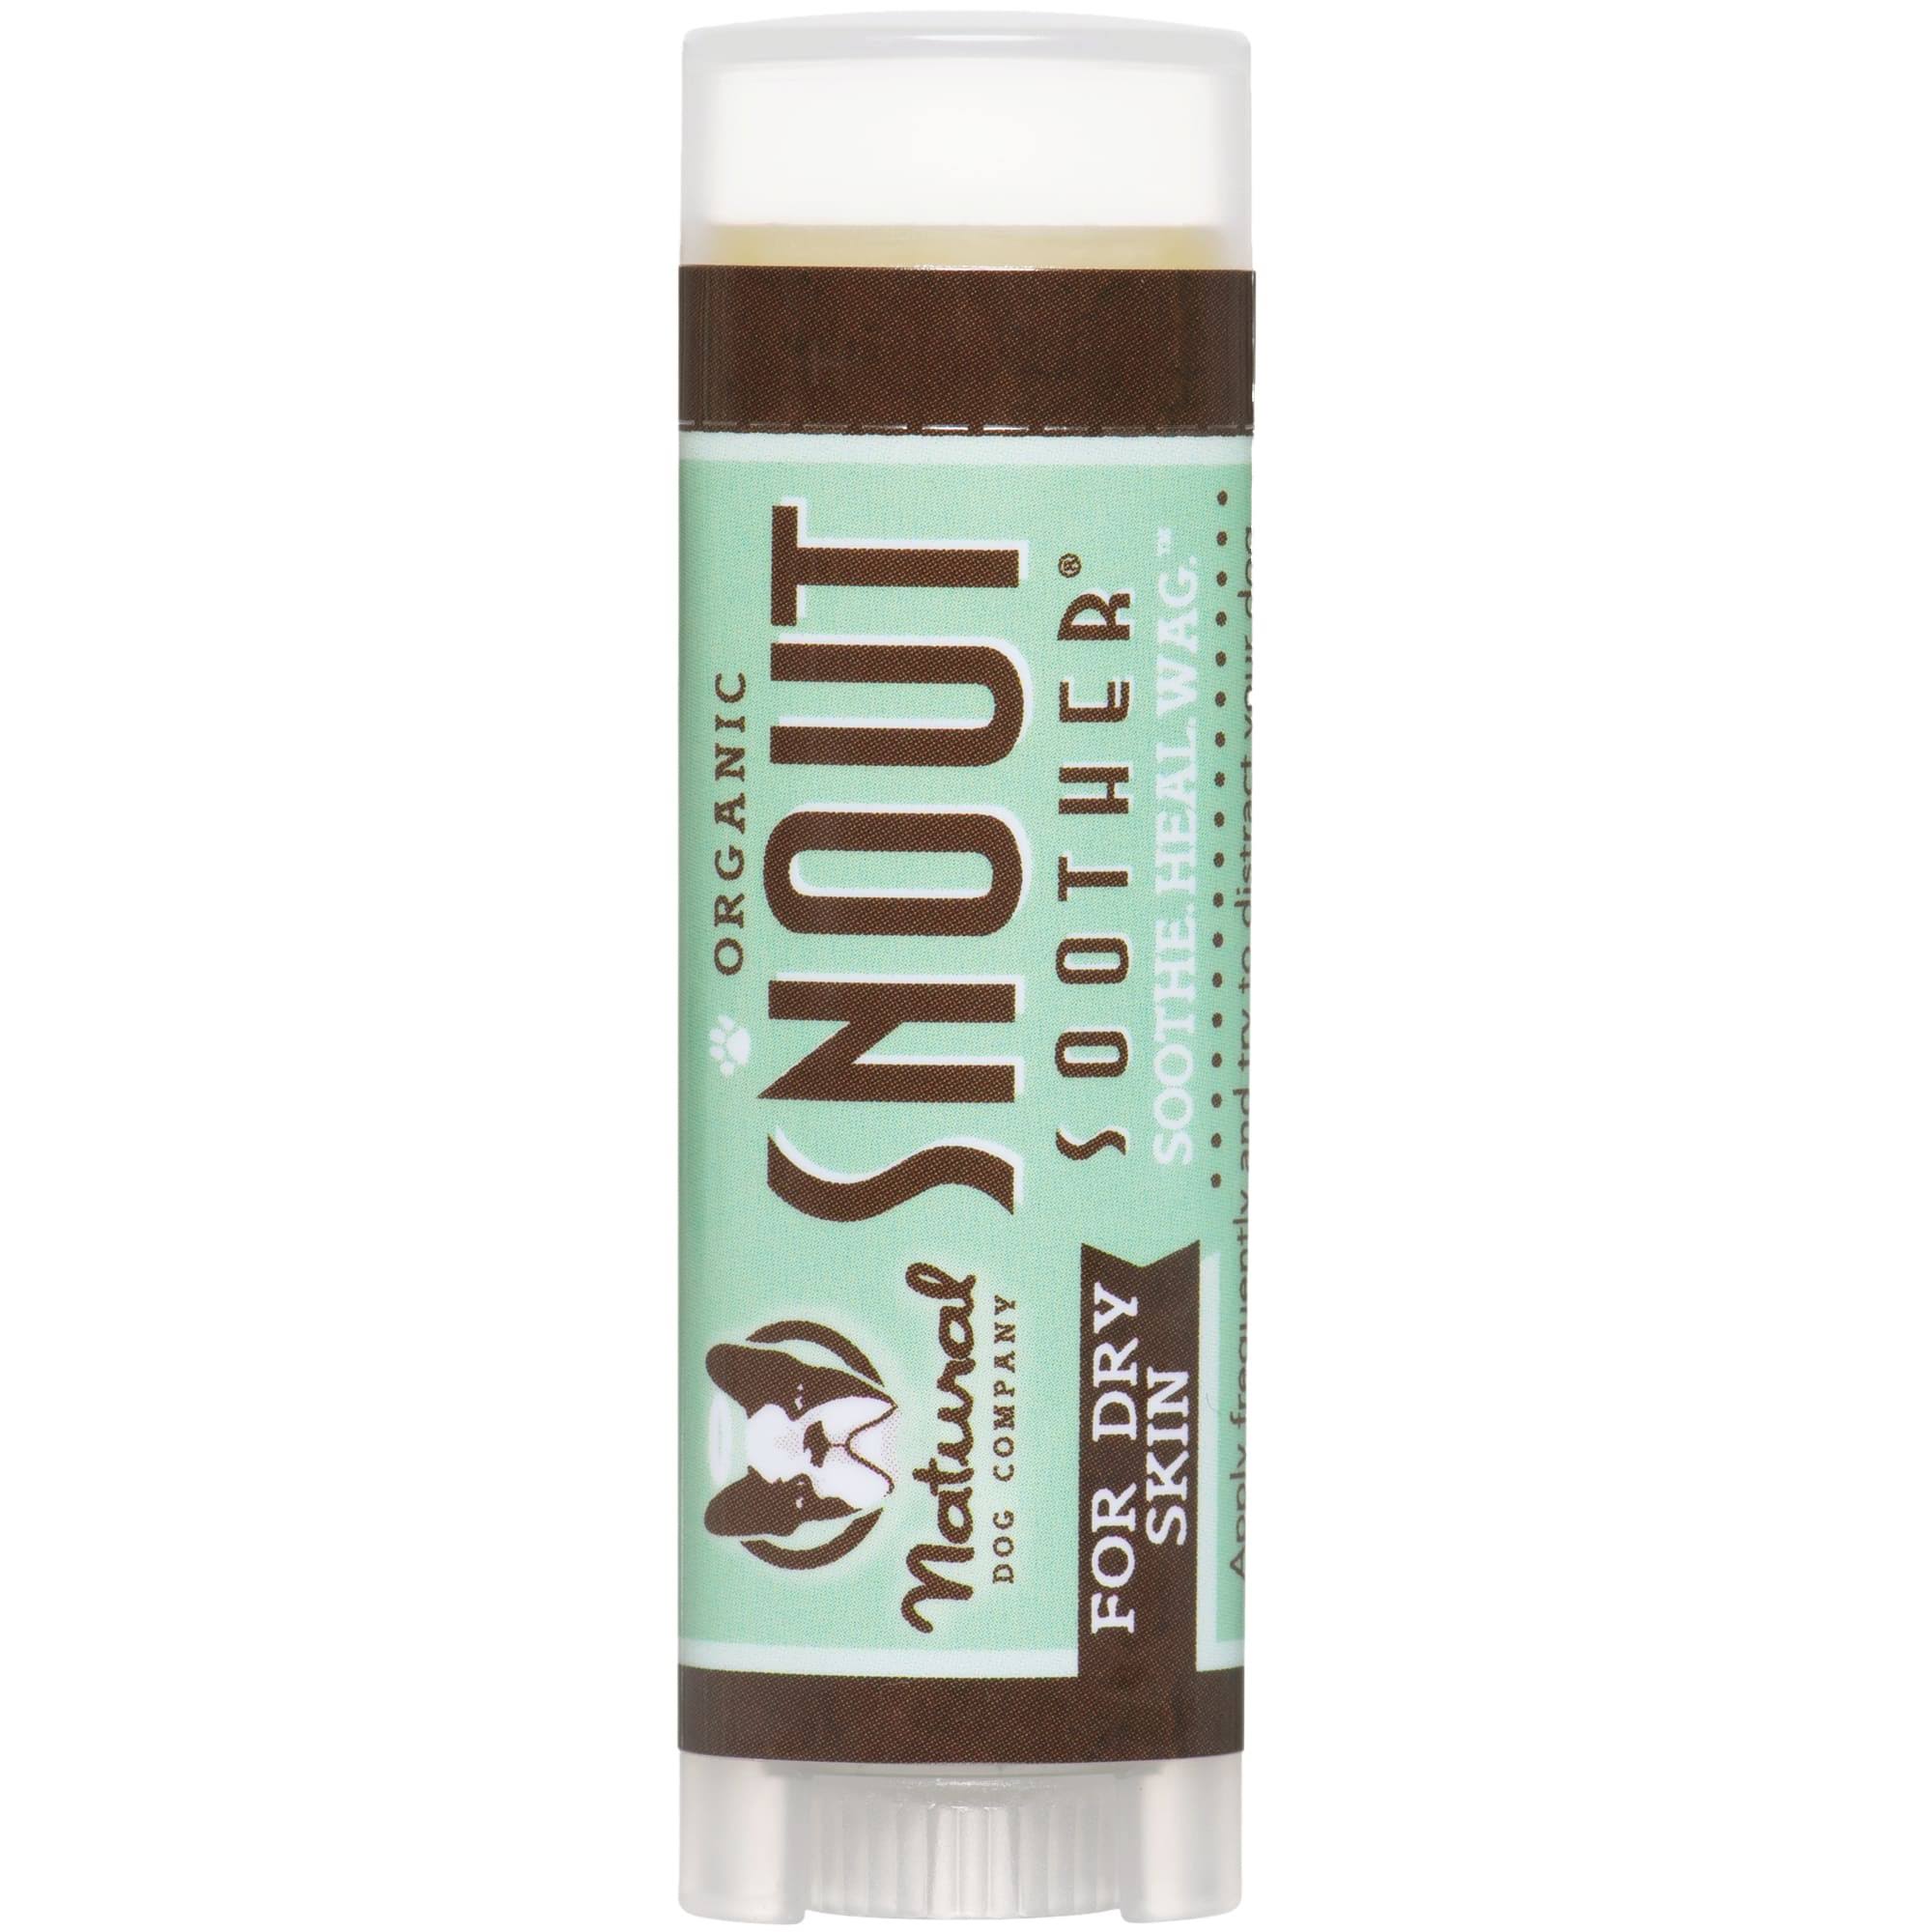 Natural Dog Company Snout Soother Travel Stick - Dry Chapped